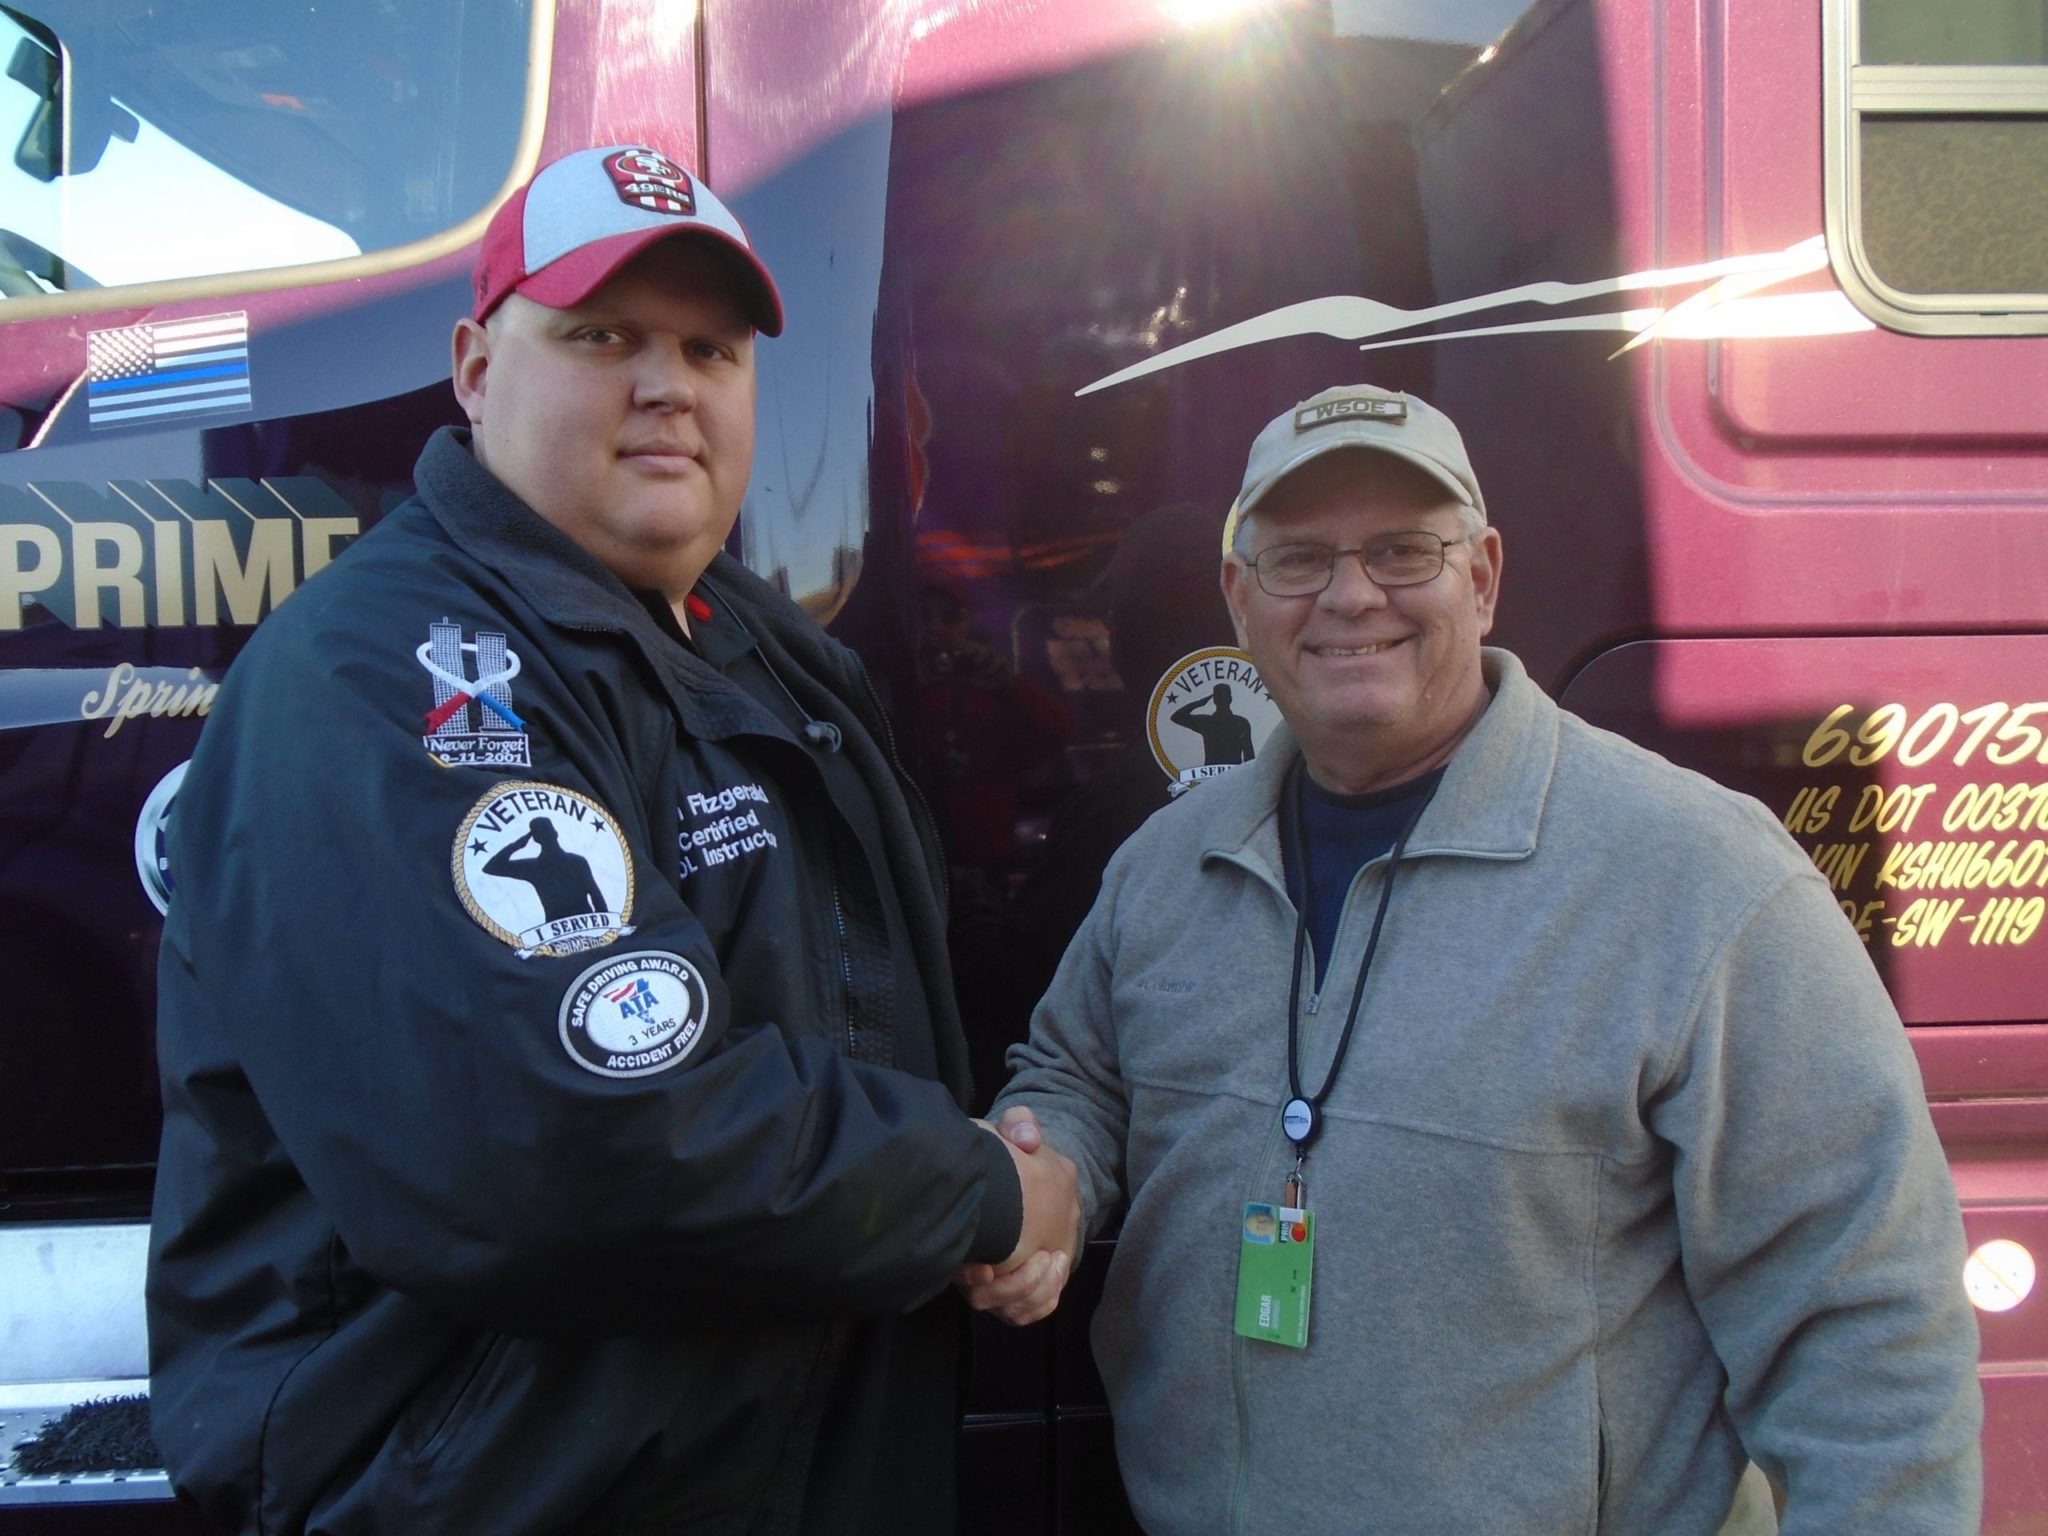 Prime driver and instructor shake hands in front of semi-truck.